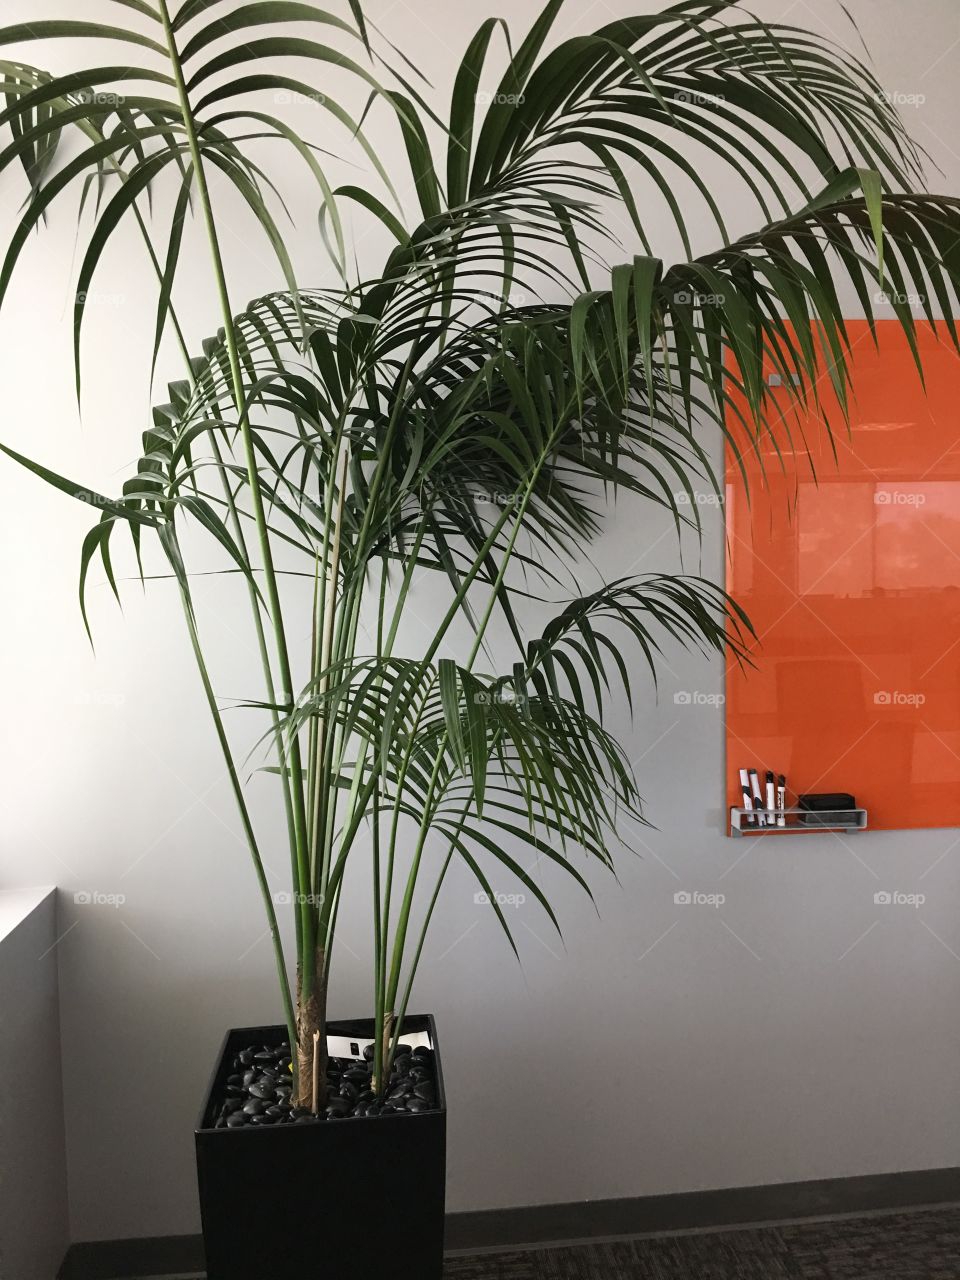 Conference Room Plant 